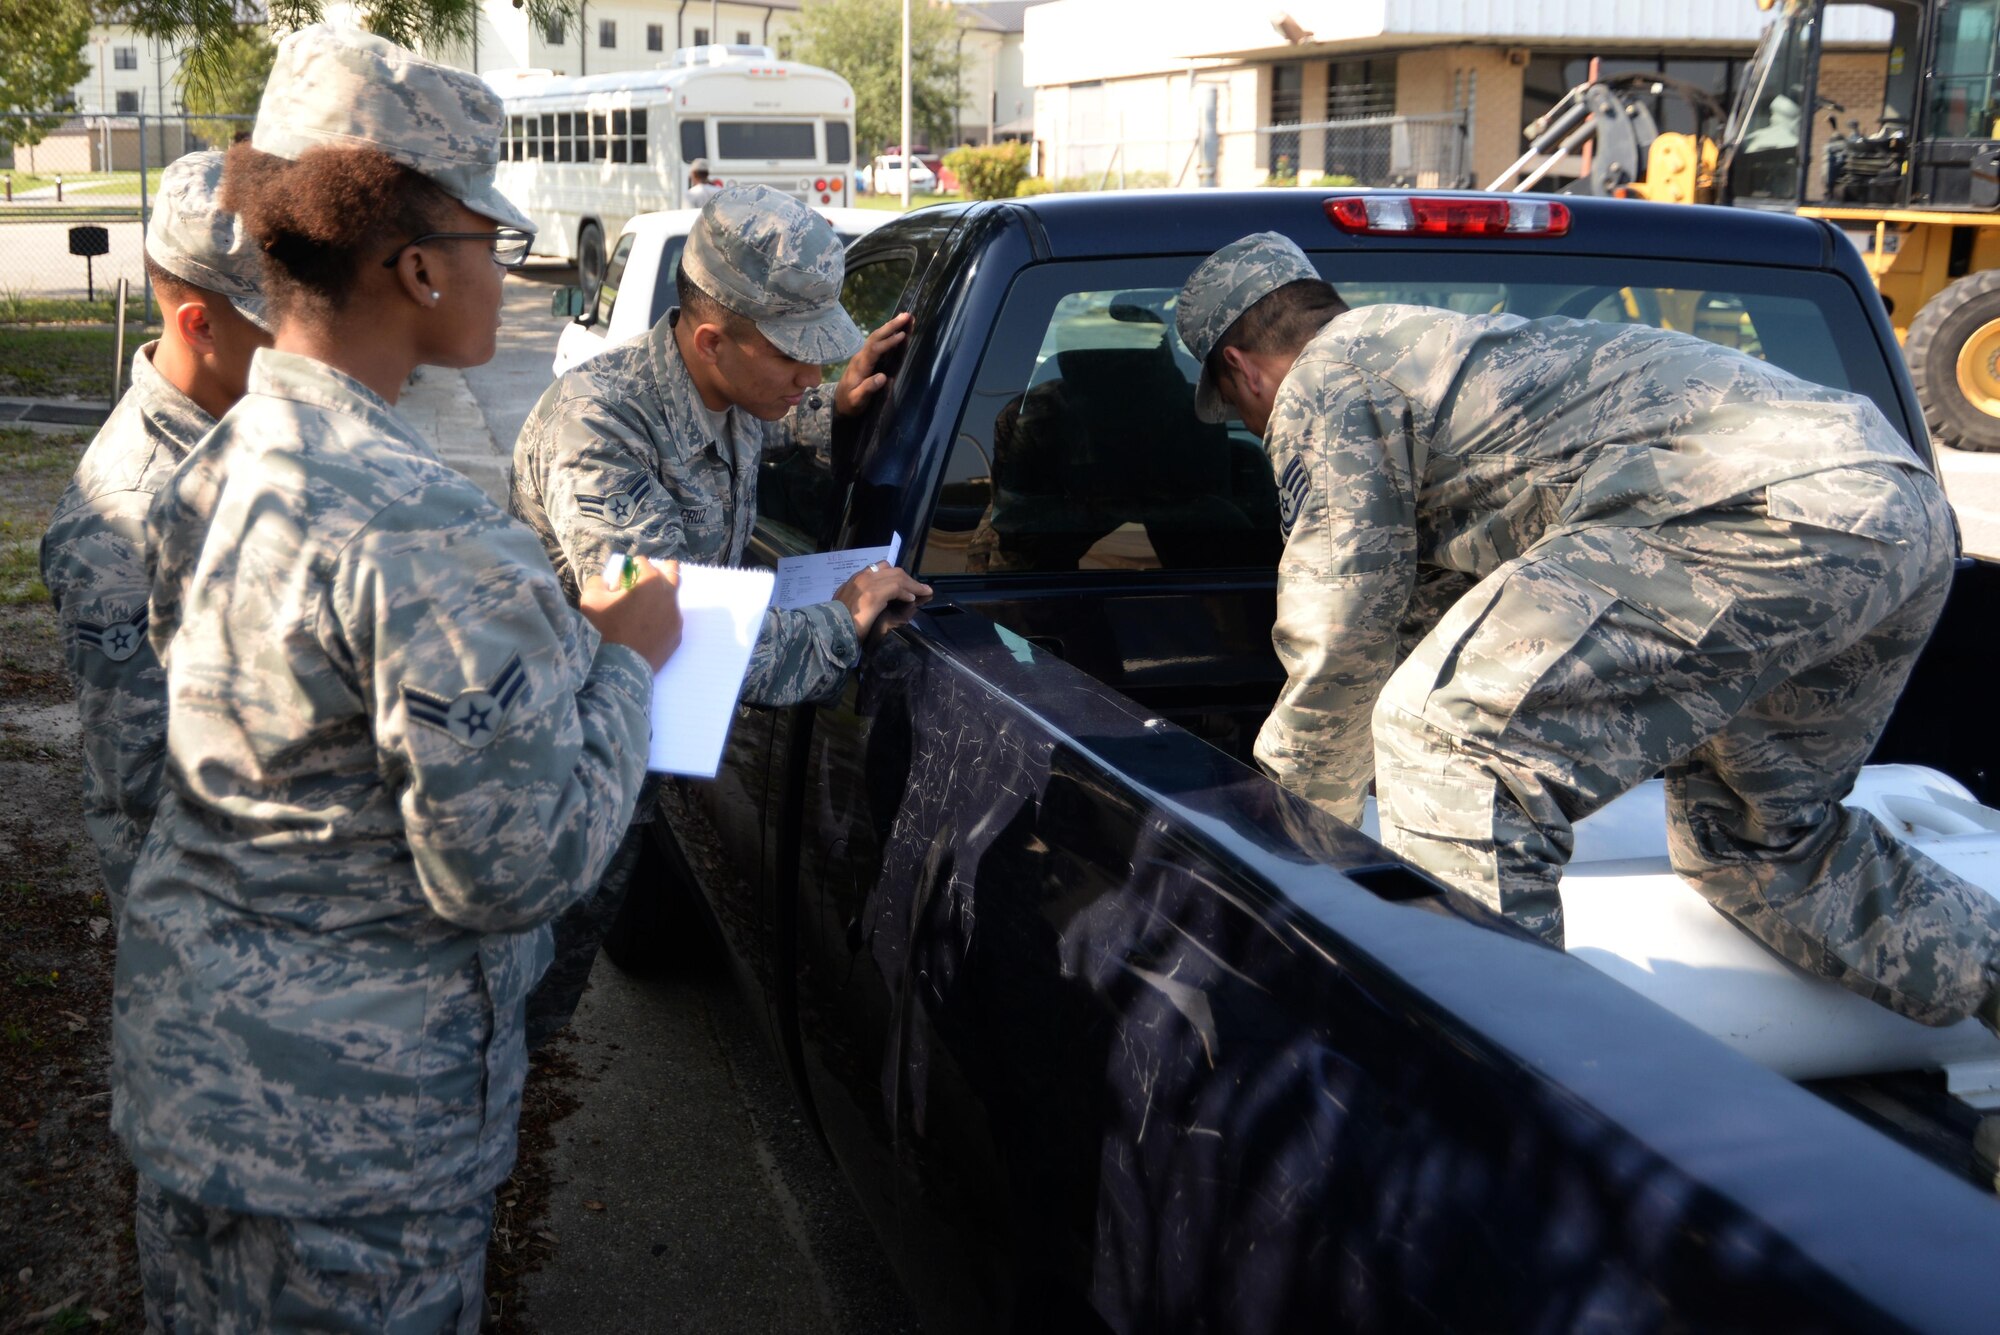 Tech. Sgt. Guillermo Gutierrez, 81st Logistics Readiness Squadron fleet management and analysis NCO in charge, briefs Airmen on how to install a propane kit Oct. 13, 2017, on Keesler Air Force Base, Mississippi. Thirteen vehicles were selected to have propane kits installed as part of a year-long Defense Department study to determine the environmental effects of using propane instead of gasoline in vehicles. (U.S. Air Force photo by Airman 1st Class Suzanna Plotnikov)